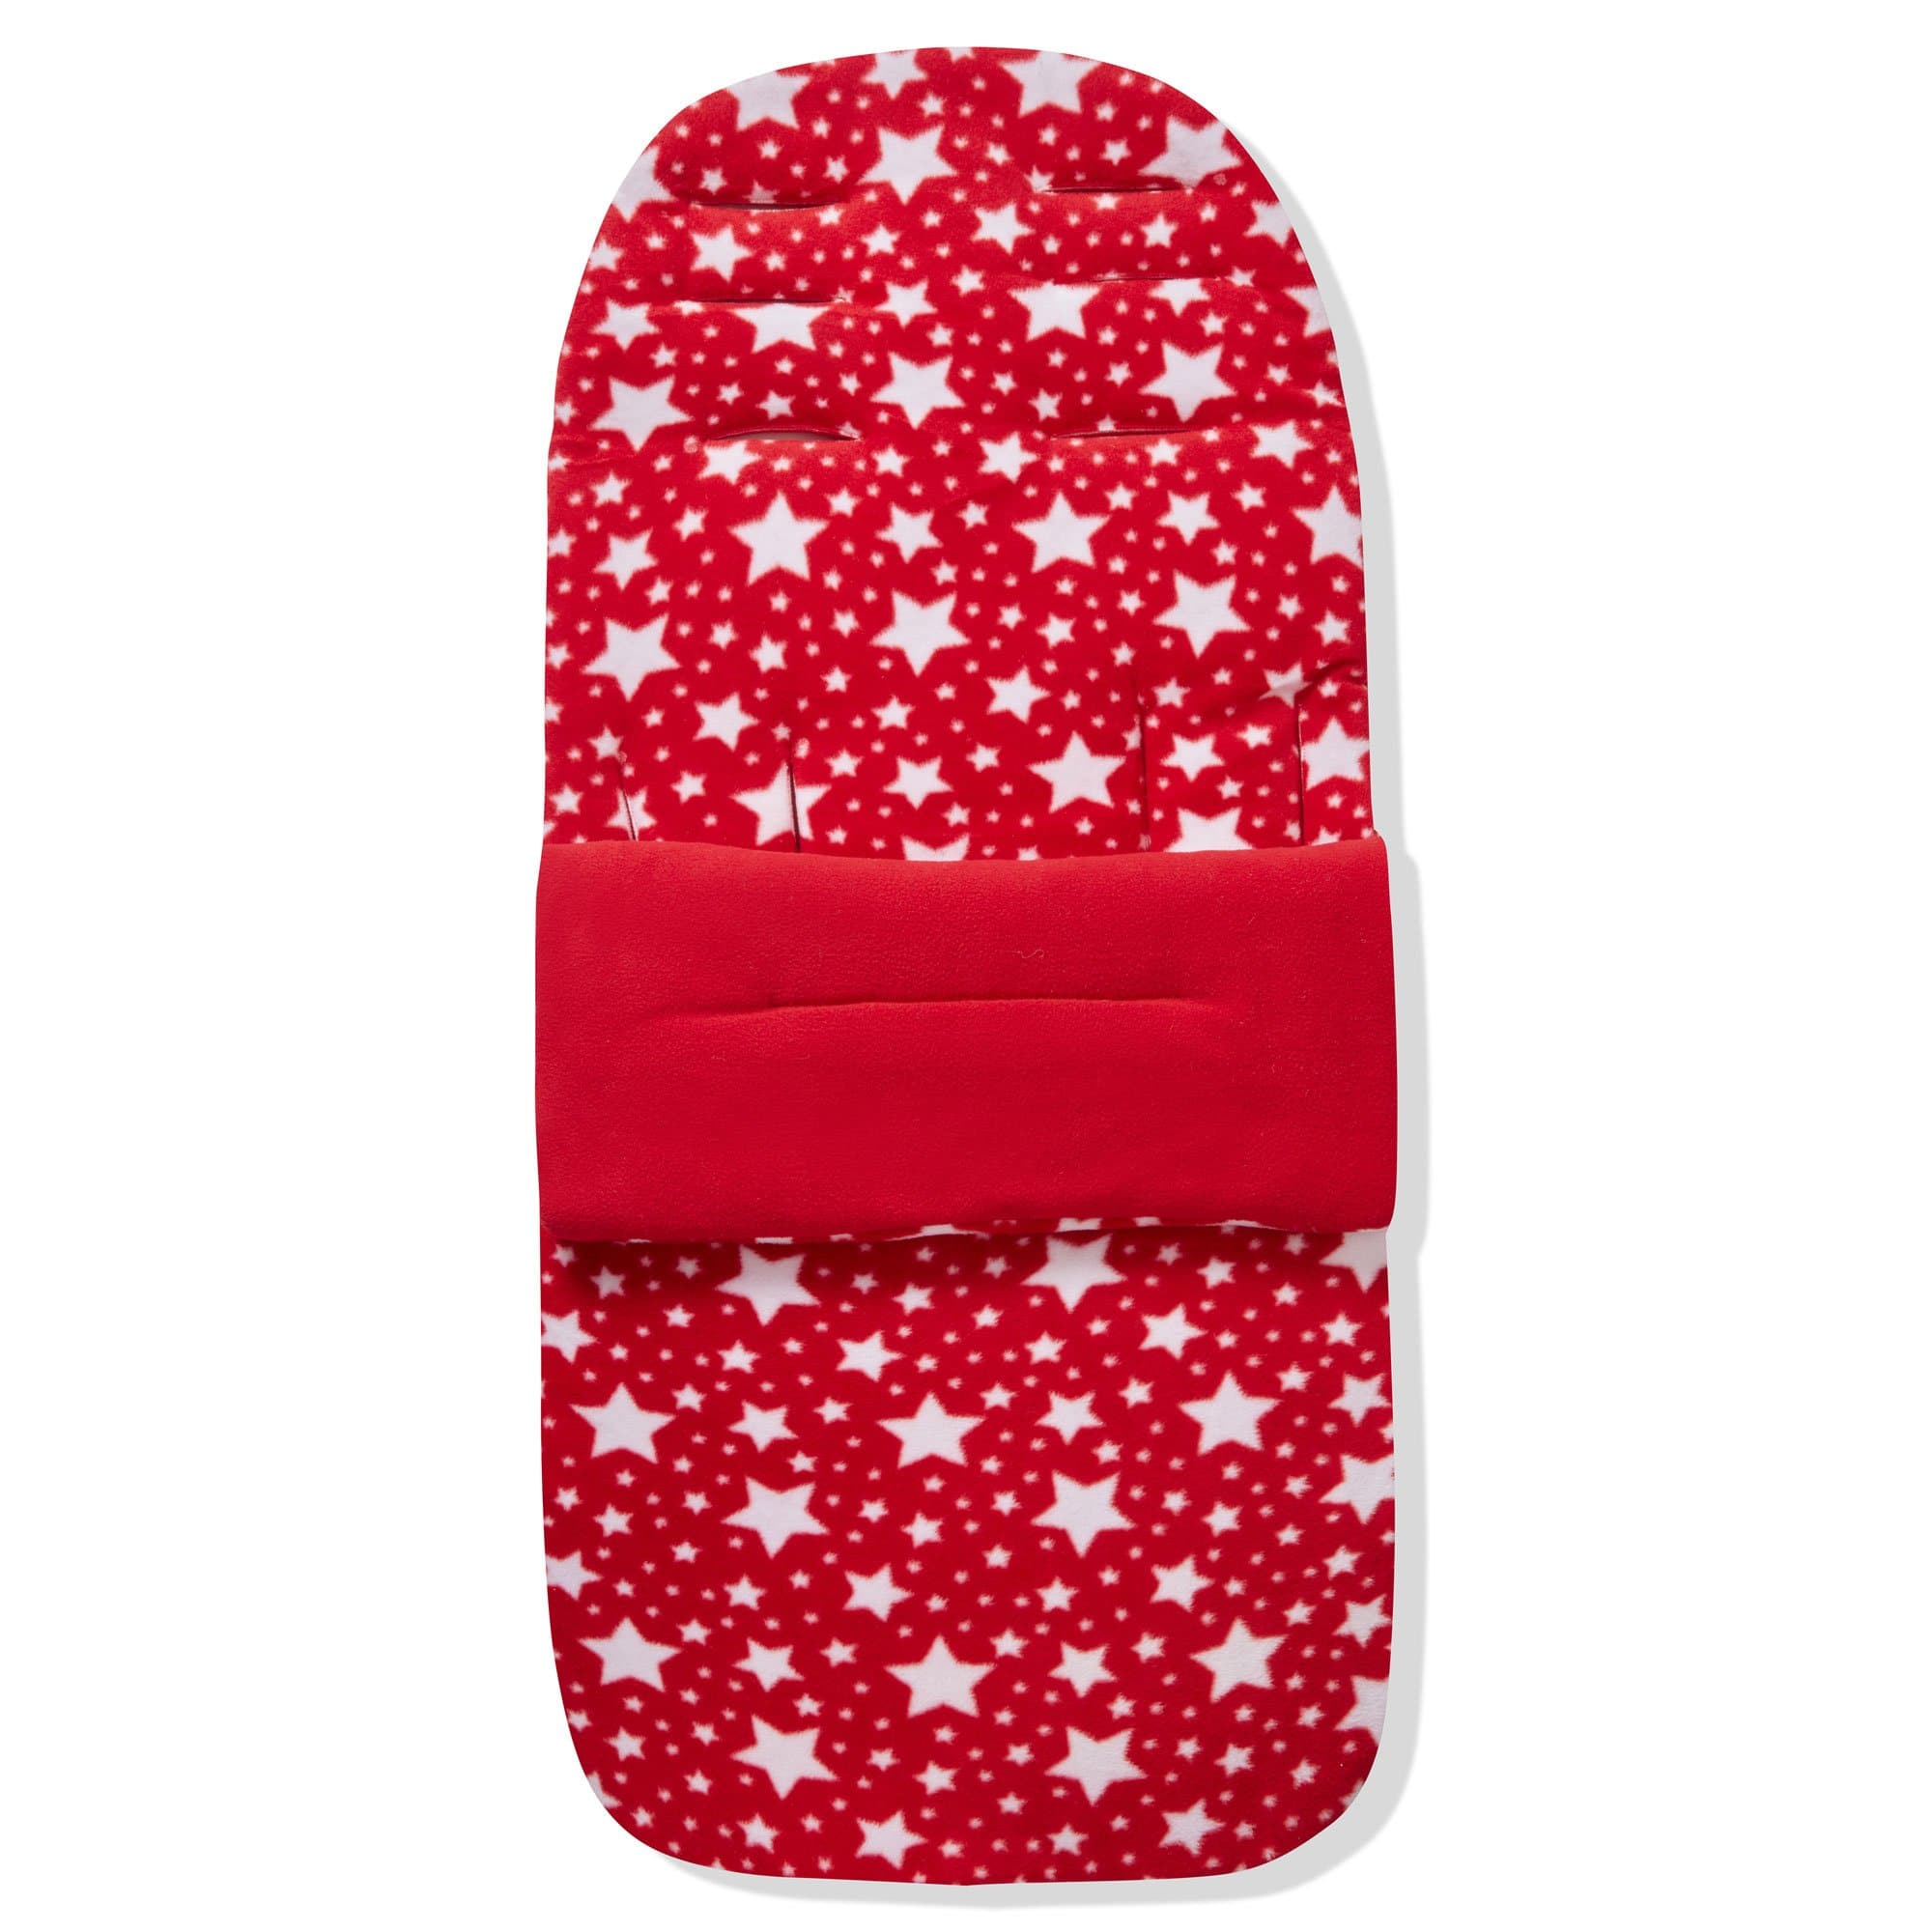 Fleece Footmuff / Cosy Toes Compatible with Mountain Buggy - Red Star / Fits All Models | For Your Little One